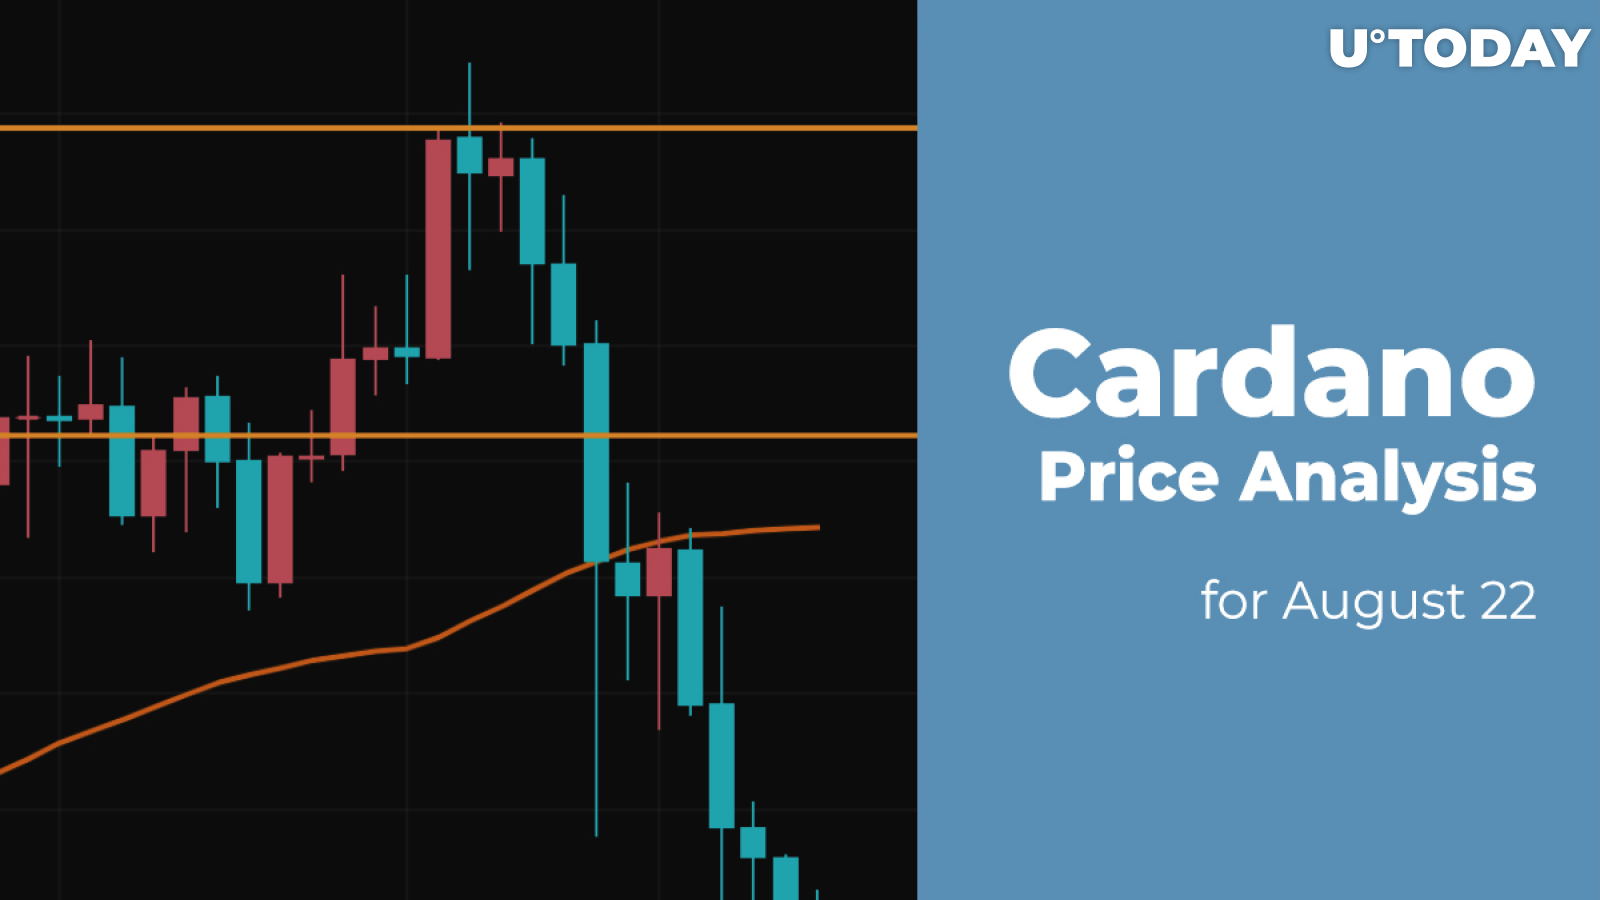 Cardano (ADA) Price Analysis for August 22